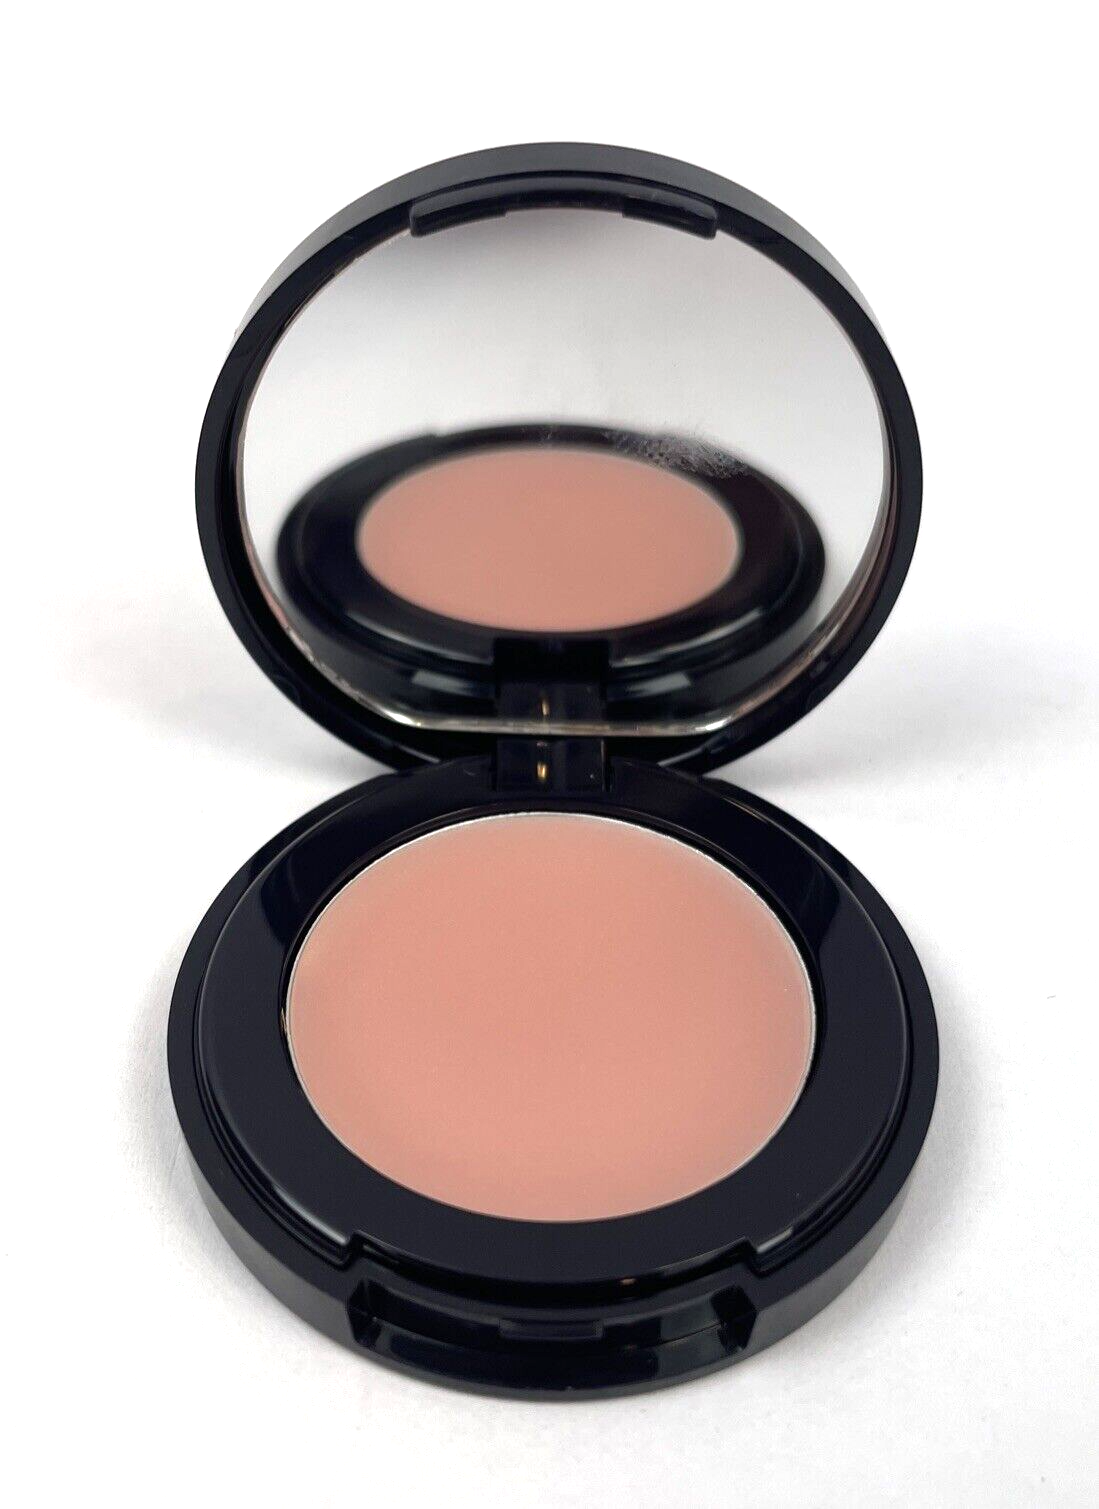 Estee Lauder Pure Color Envy Blooming Lip Balm Clear Compact Mirror Travel - $15.00